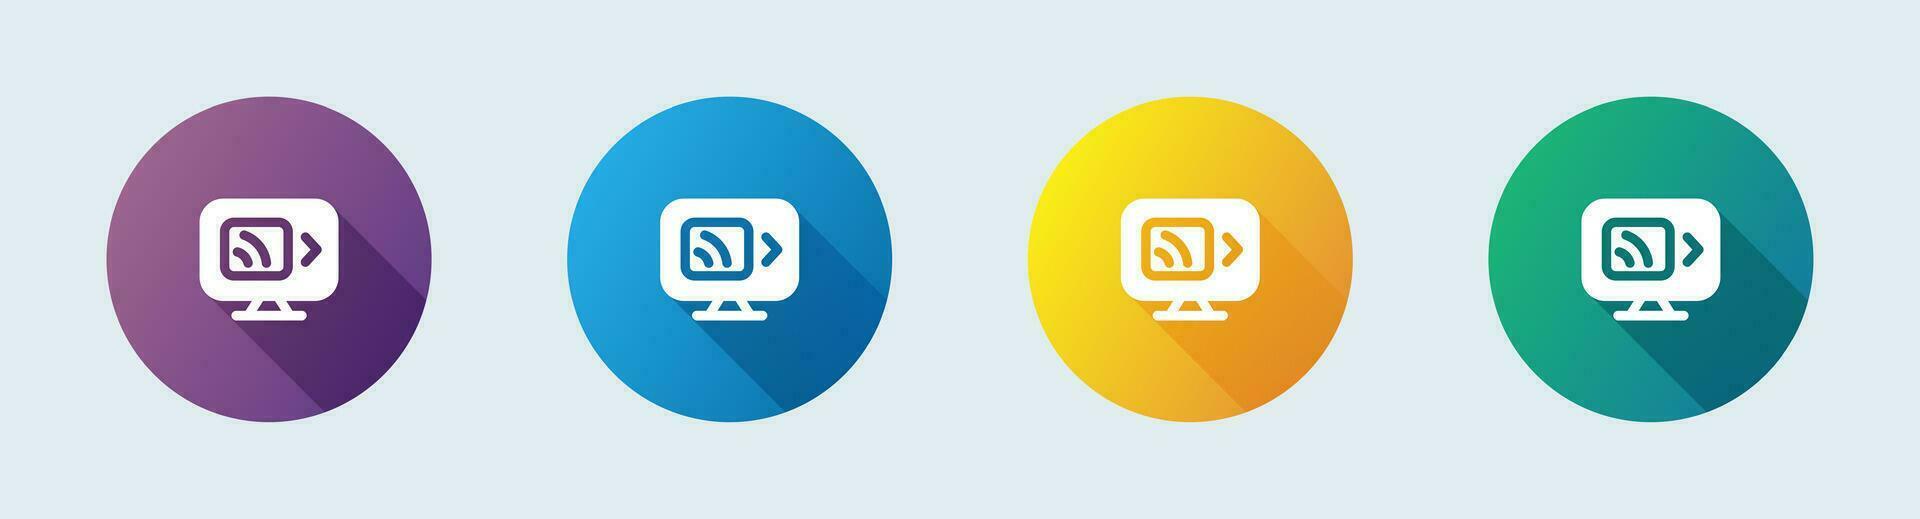 Screen mirroring solid icon in flat design style. Wireless display signs vector illustration.